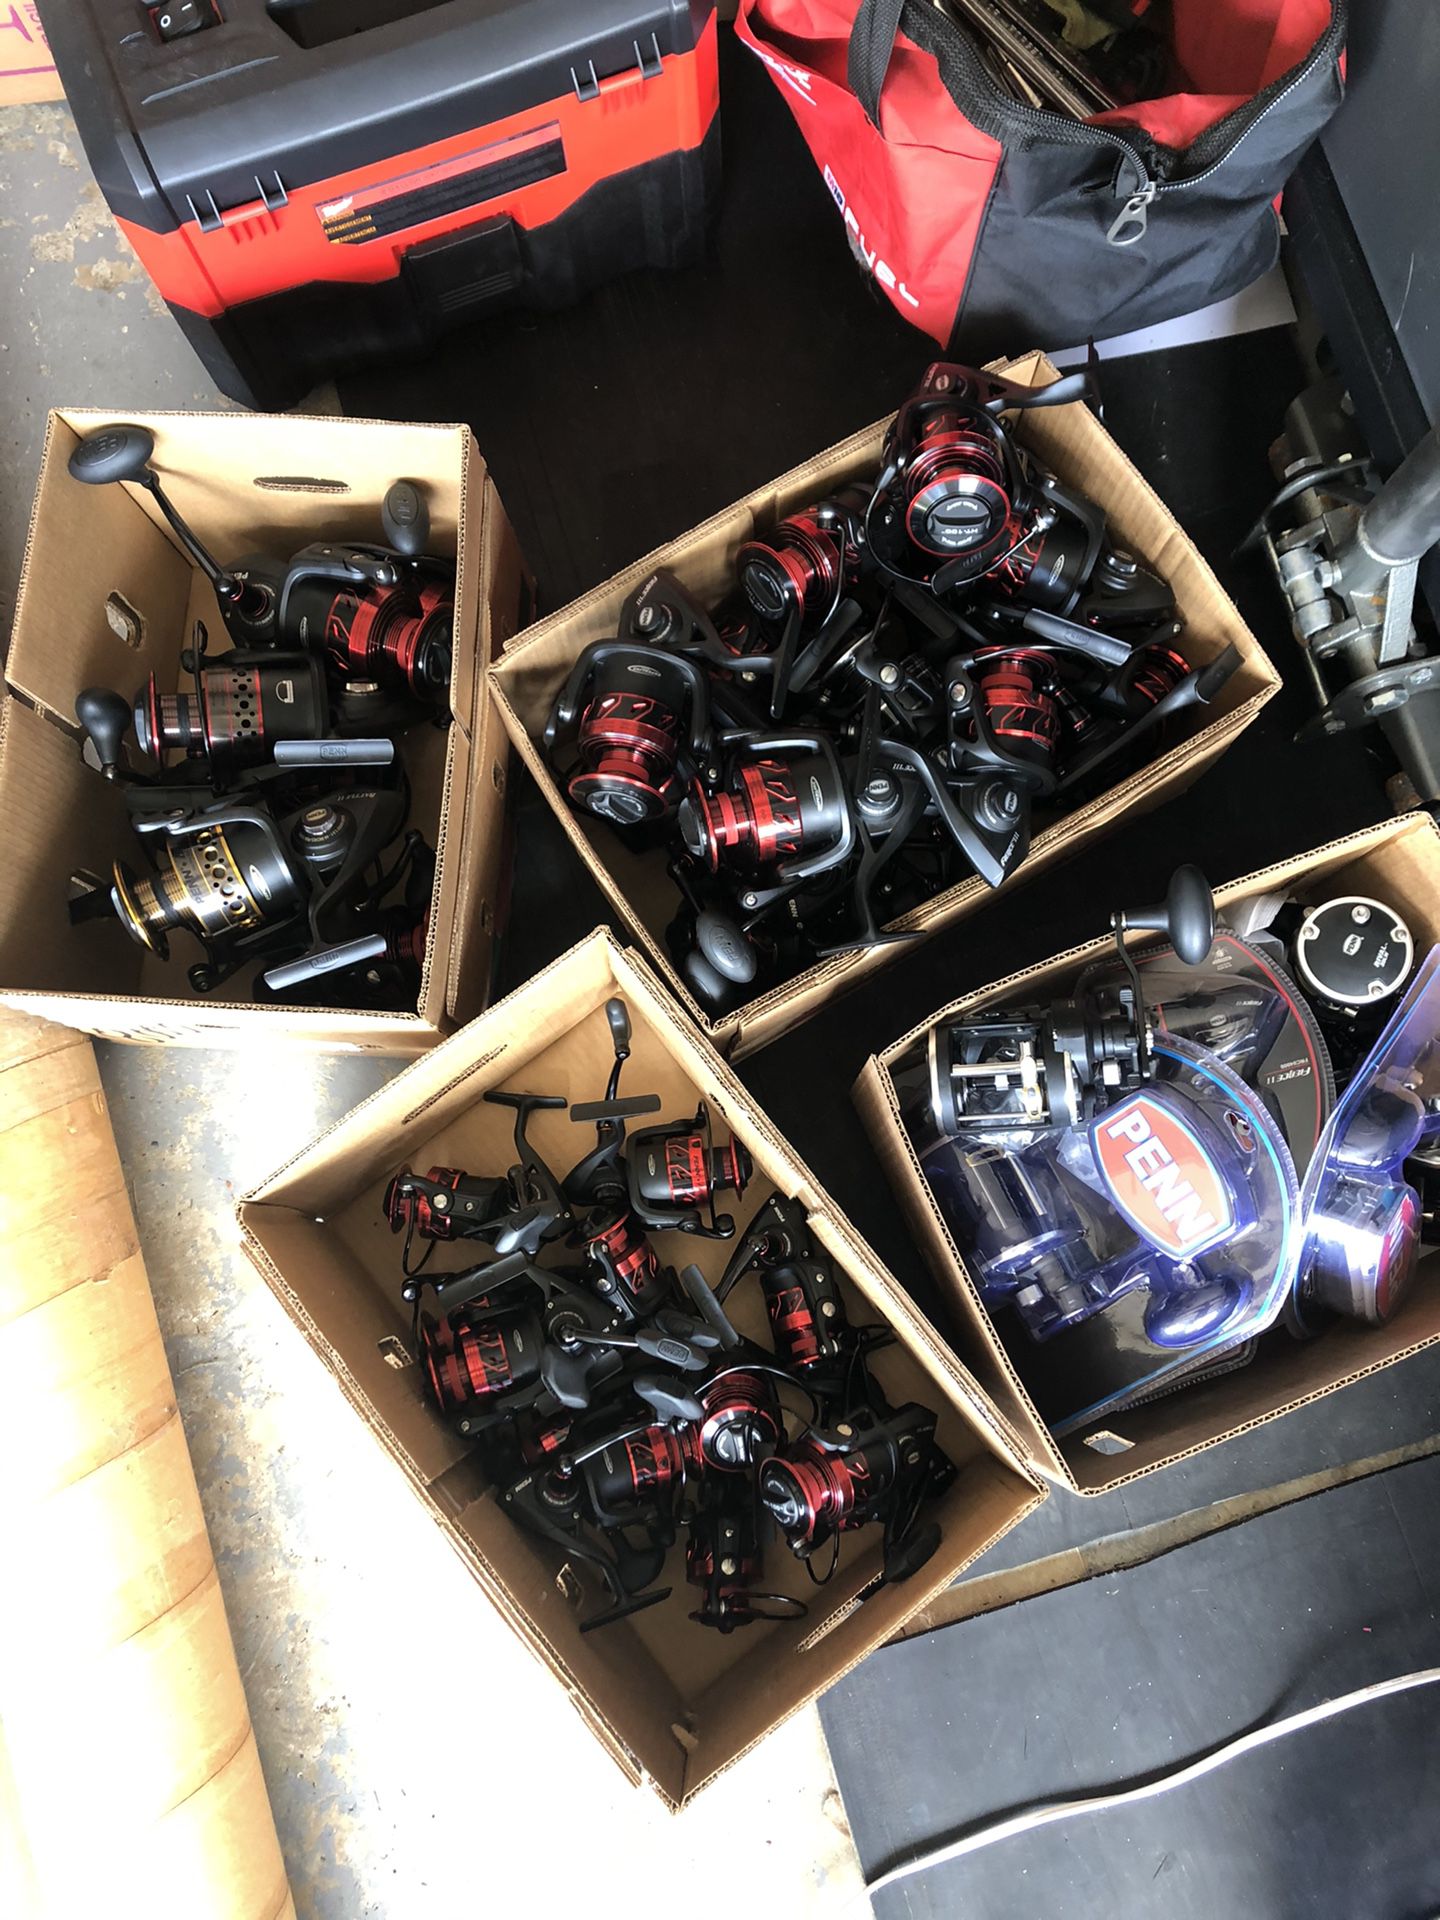 Penn fishing reels (message for prices)